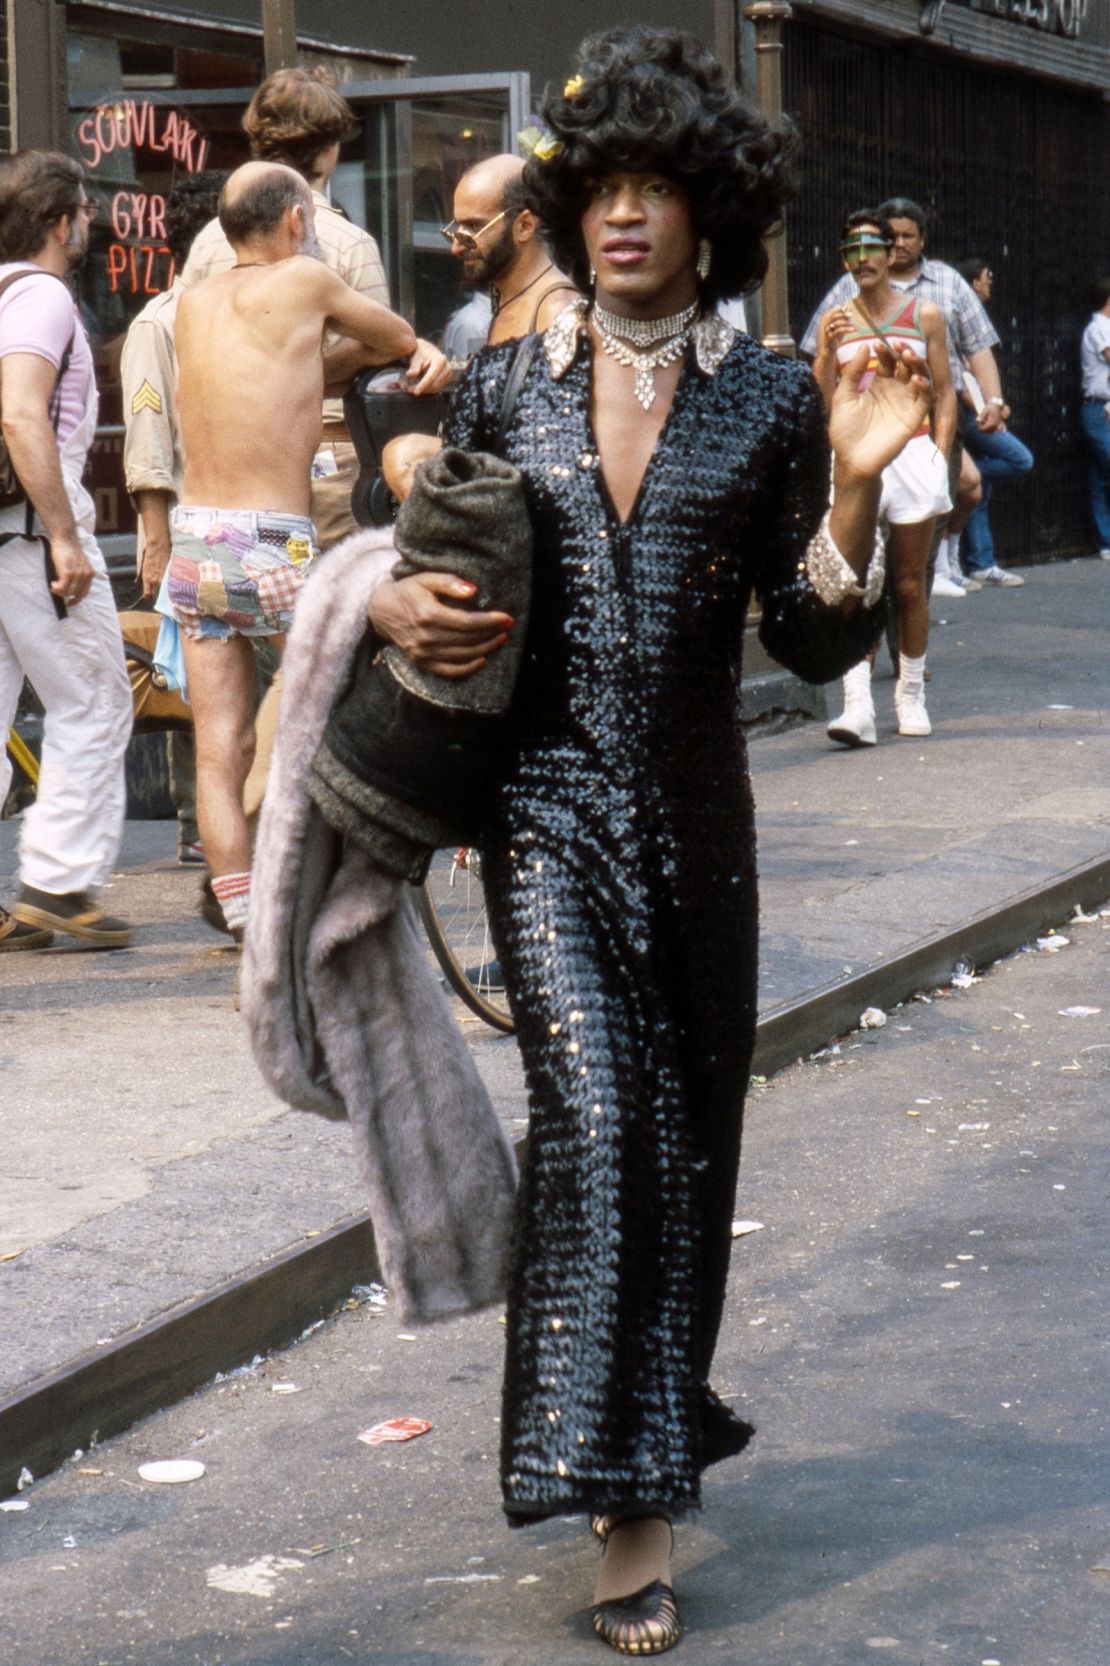 American gay liberation activist Marsha P Johnson (1945 - 1992) on the corner of Christopher Street and 7th Avenue during the Pride March (later the LGBT Pride March), New York, New York, June 27, 1982. (Photo by Barbara Alper/Getty Images)